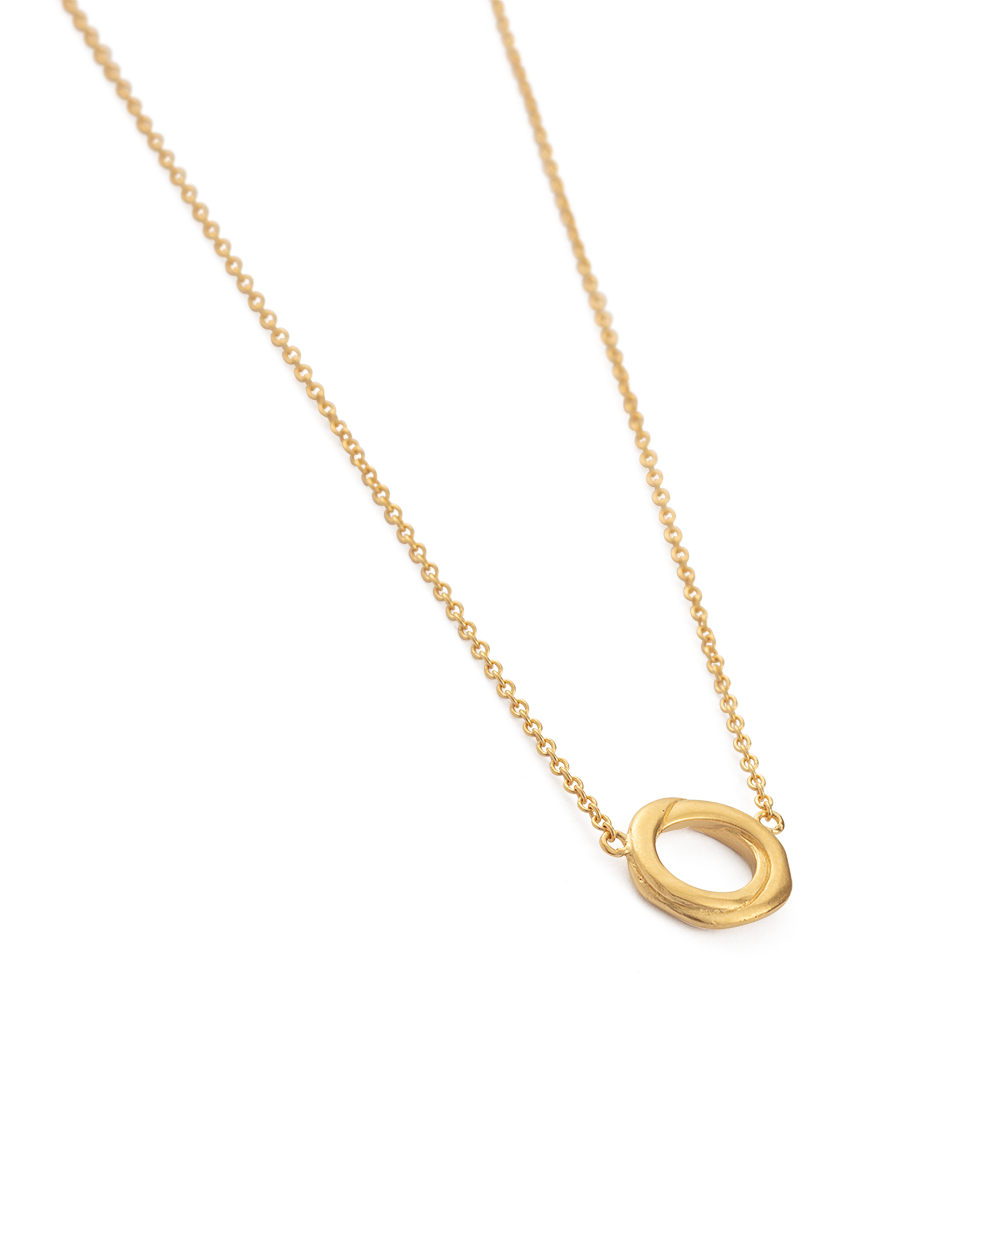 INFINITE NECKLACE (18K GOLD PLATED) – KIRSTIN ASH (United States)